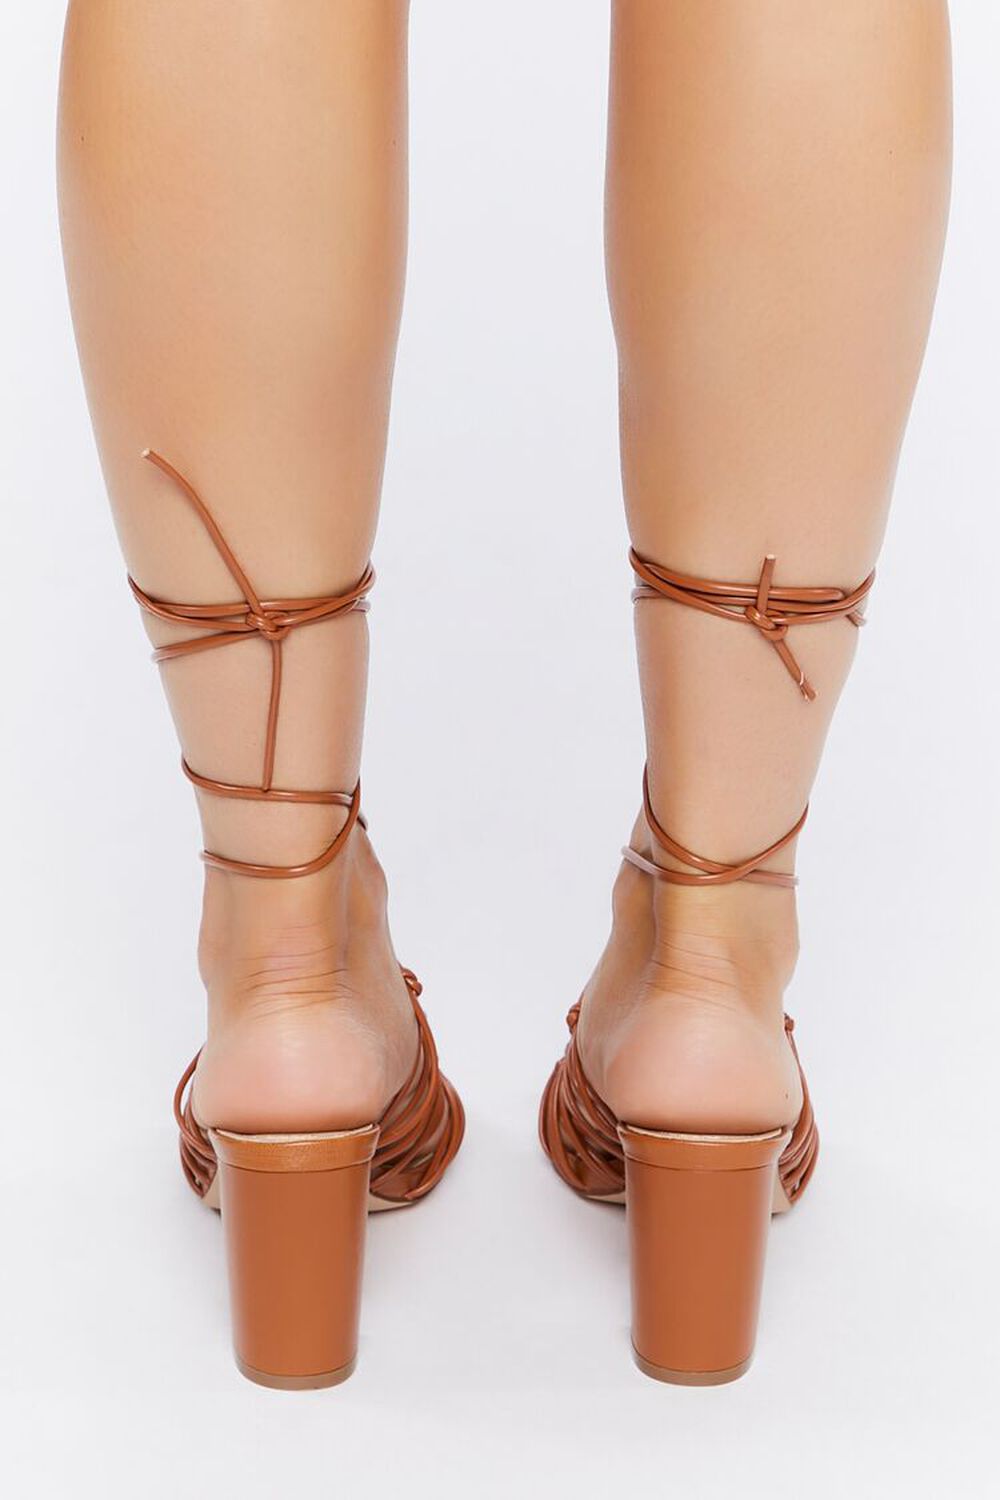 TAN Faux Leather Lace-Up Heels, image 3